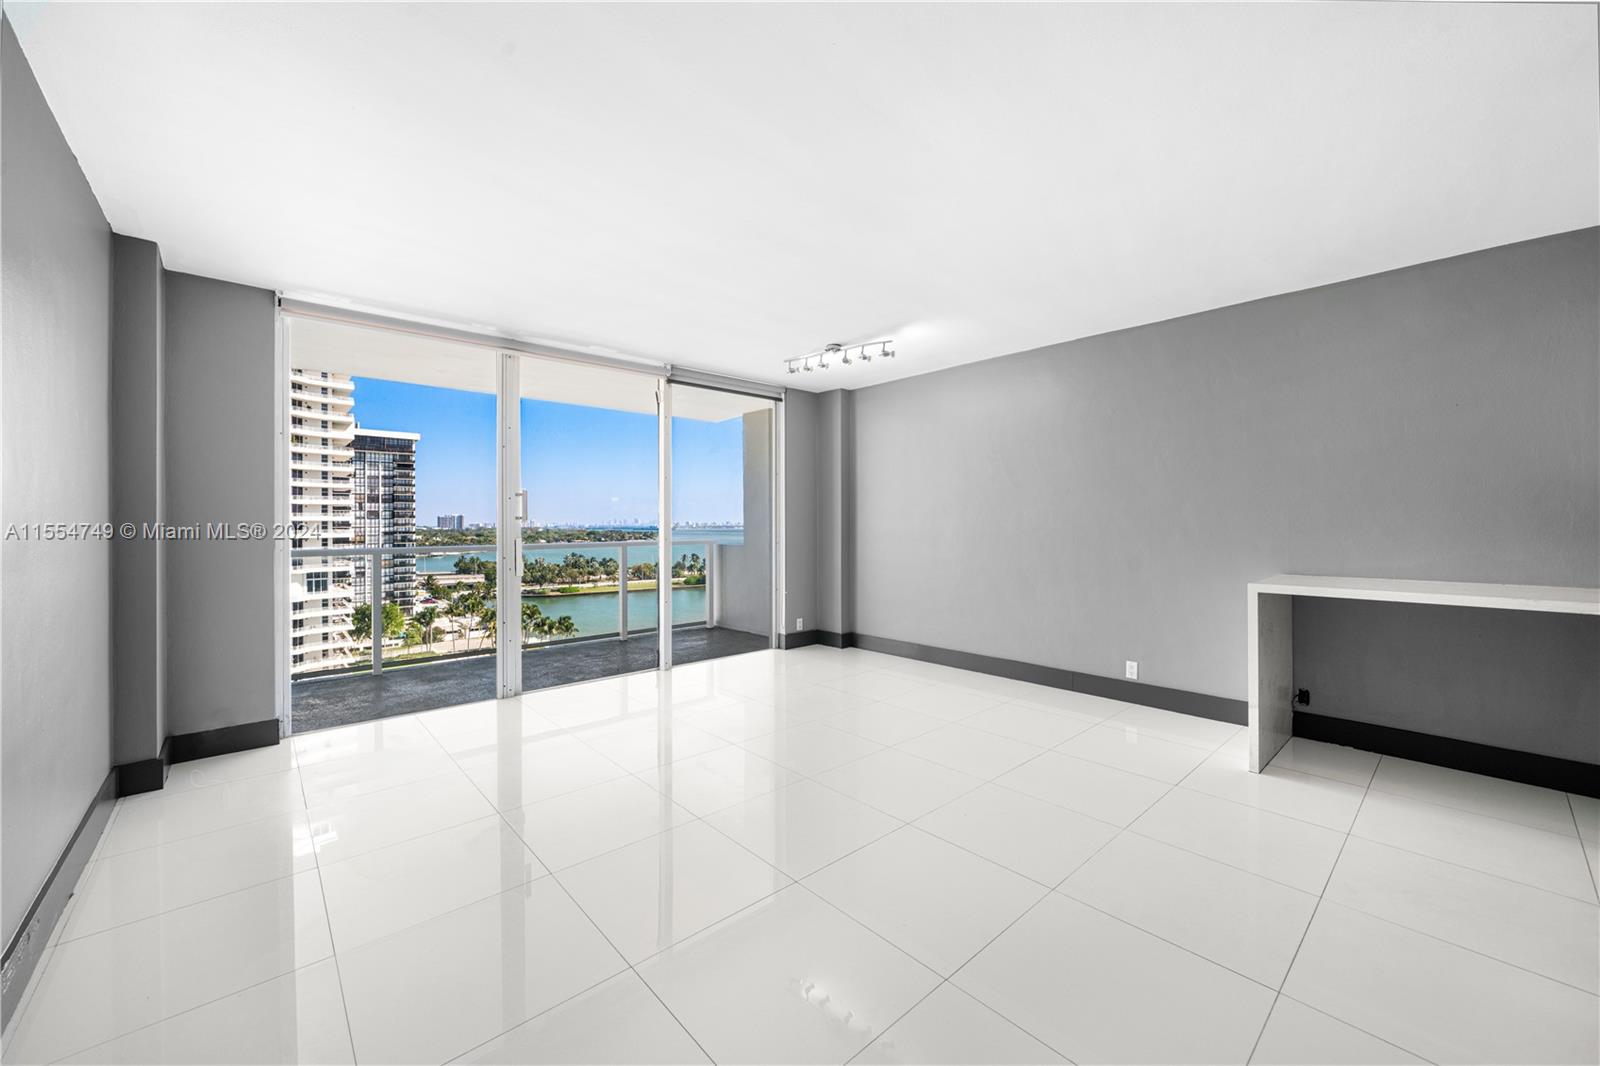 BEAUTIFULLY REMODELED WATERFRONT STUDIO WITH BREATHTAKING VIEWS OF BISCAYNE BAY IN THE HEART OF EDGEWATER NEIGHBORHOOD IN MIAMI. WITHIN WALKING DISTANCE TO MIAMI DESIGN DISTRICT, MIDTOWN, WYNWOOD, ONLY A BRIDGE AWAY FROM MIAMI BEACH, AND CONVENIENTLY LOCATED WITHIN THREE BLOCKS OF THE HIGHWAY ACCESS. UPDATED WITH STAINLESS STEEL APPLIANCES, KITCHEN WITH ITALIAN CARRARA QUARTZ COUNTER TOP AND EURO CABINETS, REMODELED BATHROOM, SPACIOUS BALCONY WITH BAY VIEWS. AMENITIES INCLUDE A HEATED POOL, PRIVATE DOG PARK, GYM, MANAGEMENT ON SITE, BEACH CABANA, DOCK, BBQ AREA, LOUNGE/GAME ROOM, TENNIS COURT. INCLUDED IN RENT ARE: 1 ASSIGNED PARKING SPACE, WATER, SEWER.